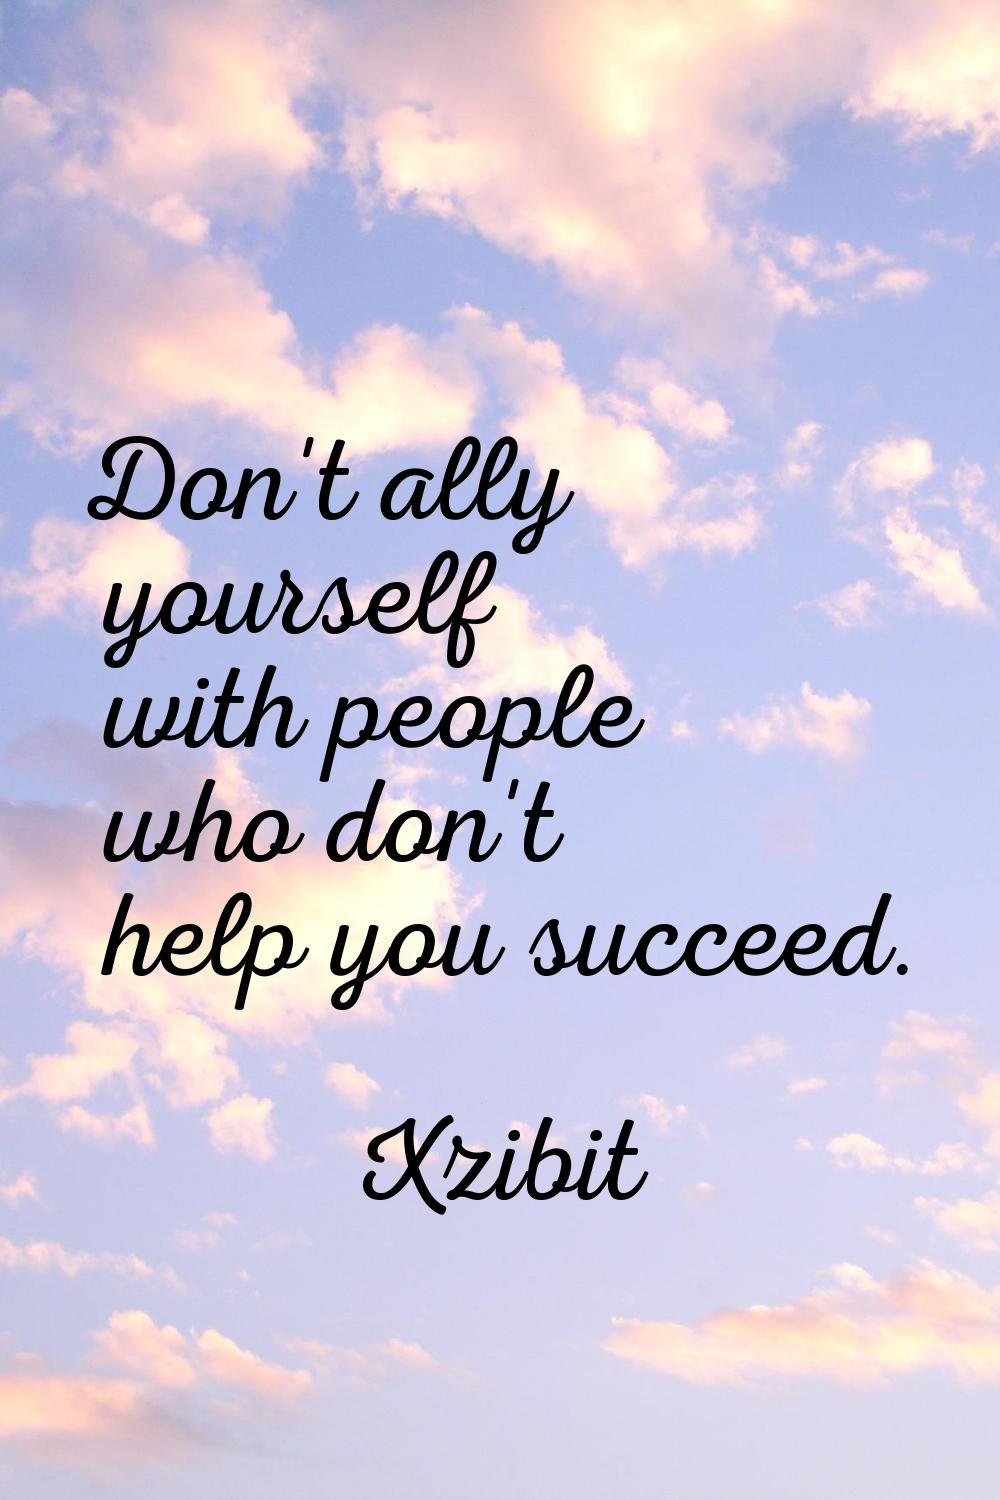 Don't ally yourself with people who don't help you succeed.